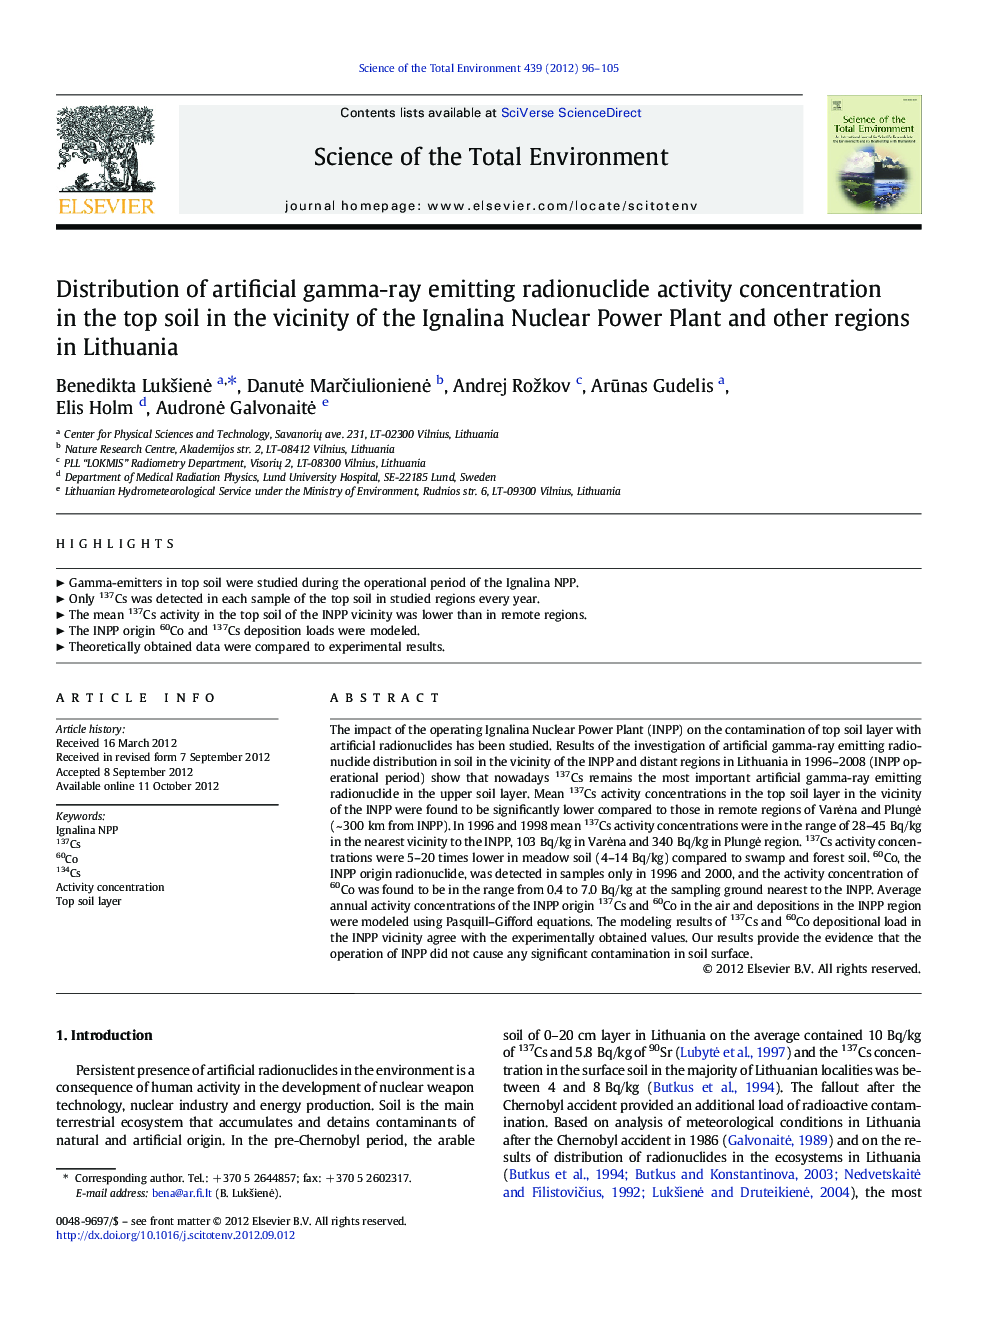 Distribution of artificial gamma-ray emitting radionuclide activity concentration in the top soil in the vicinity of the Ignalina Nuclear Power Plant and other regions in Lithuania